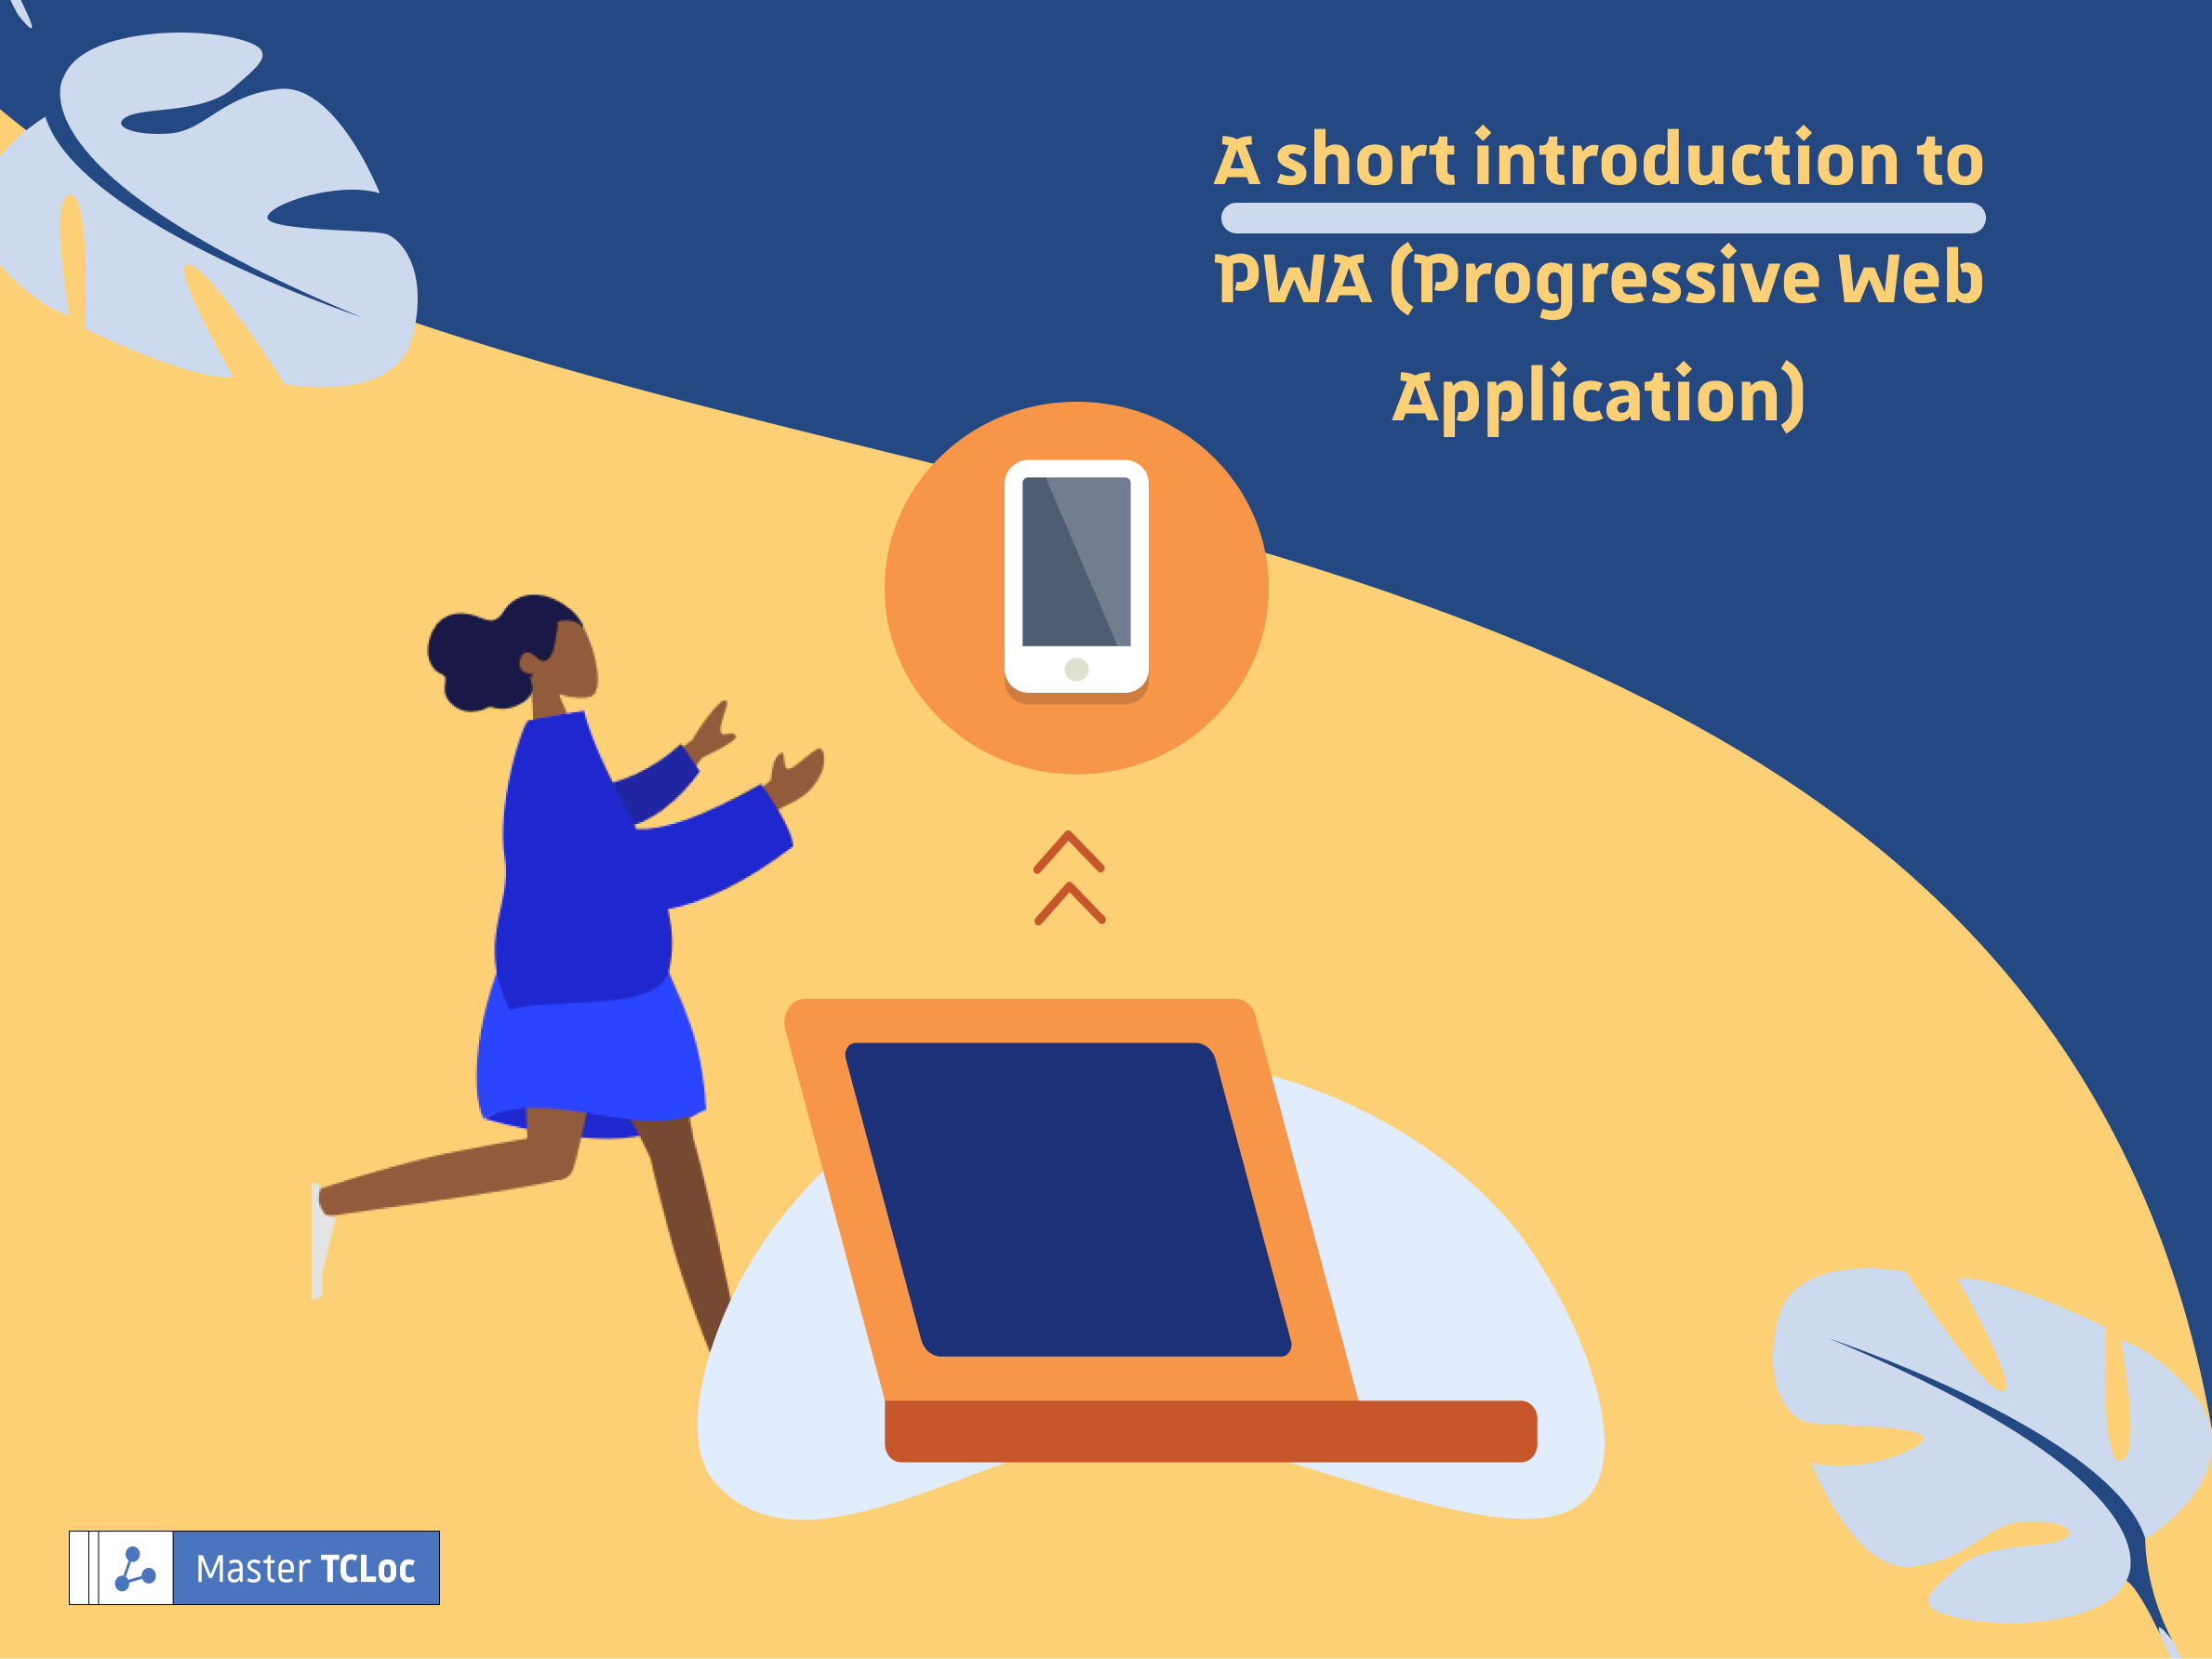 An introduction to Progressive Web Application